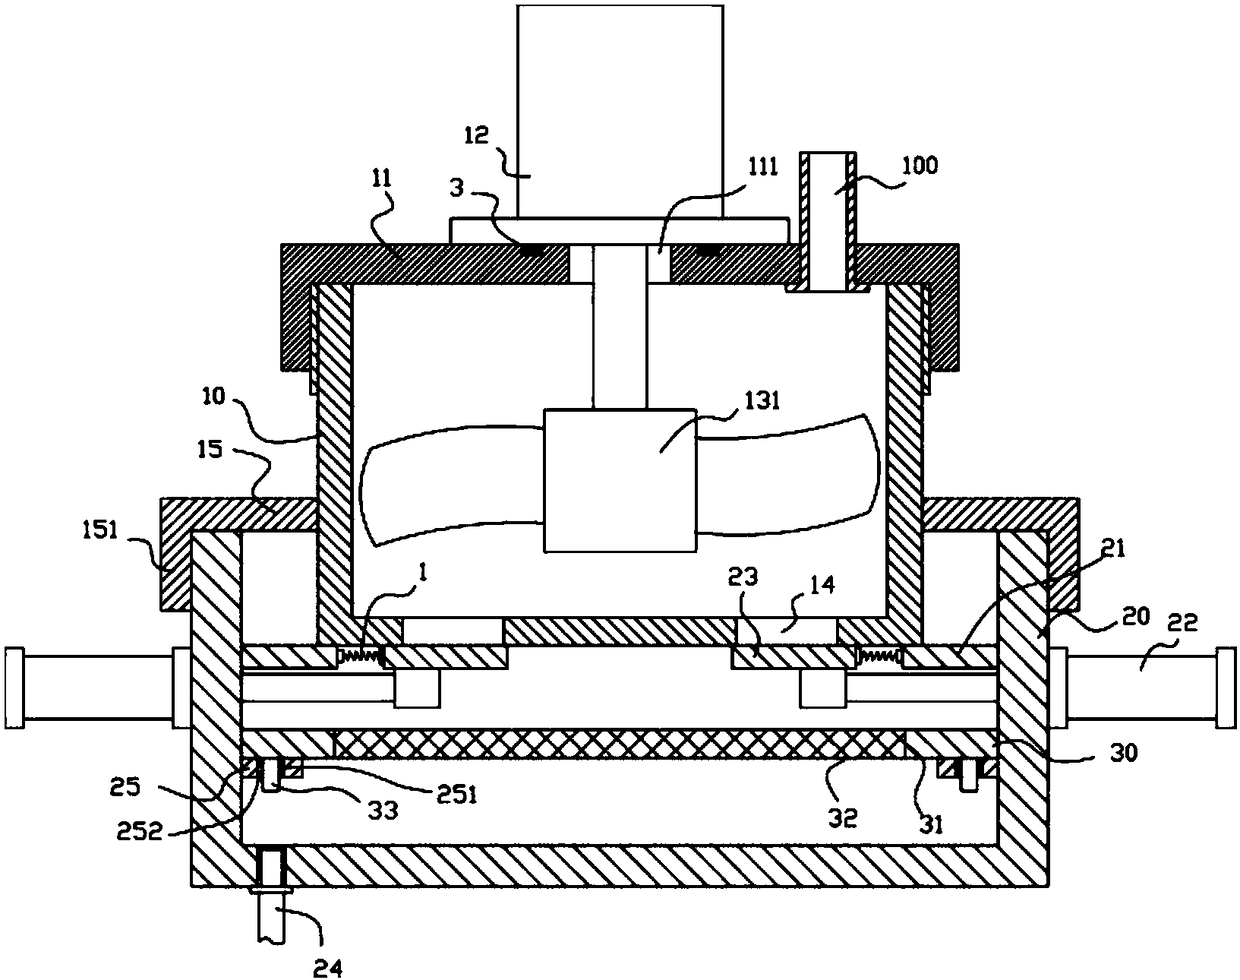 A food mixing and filtering device